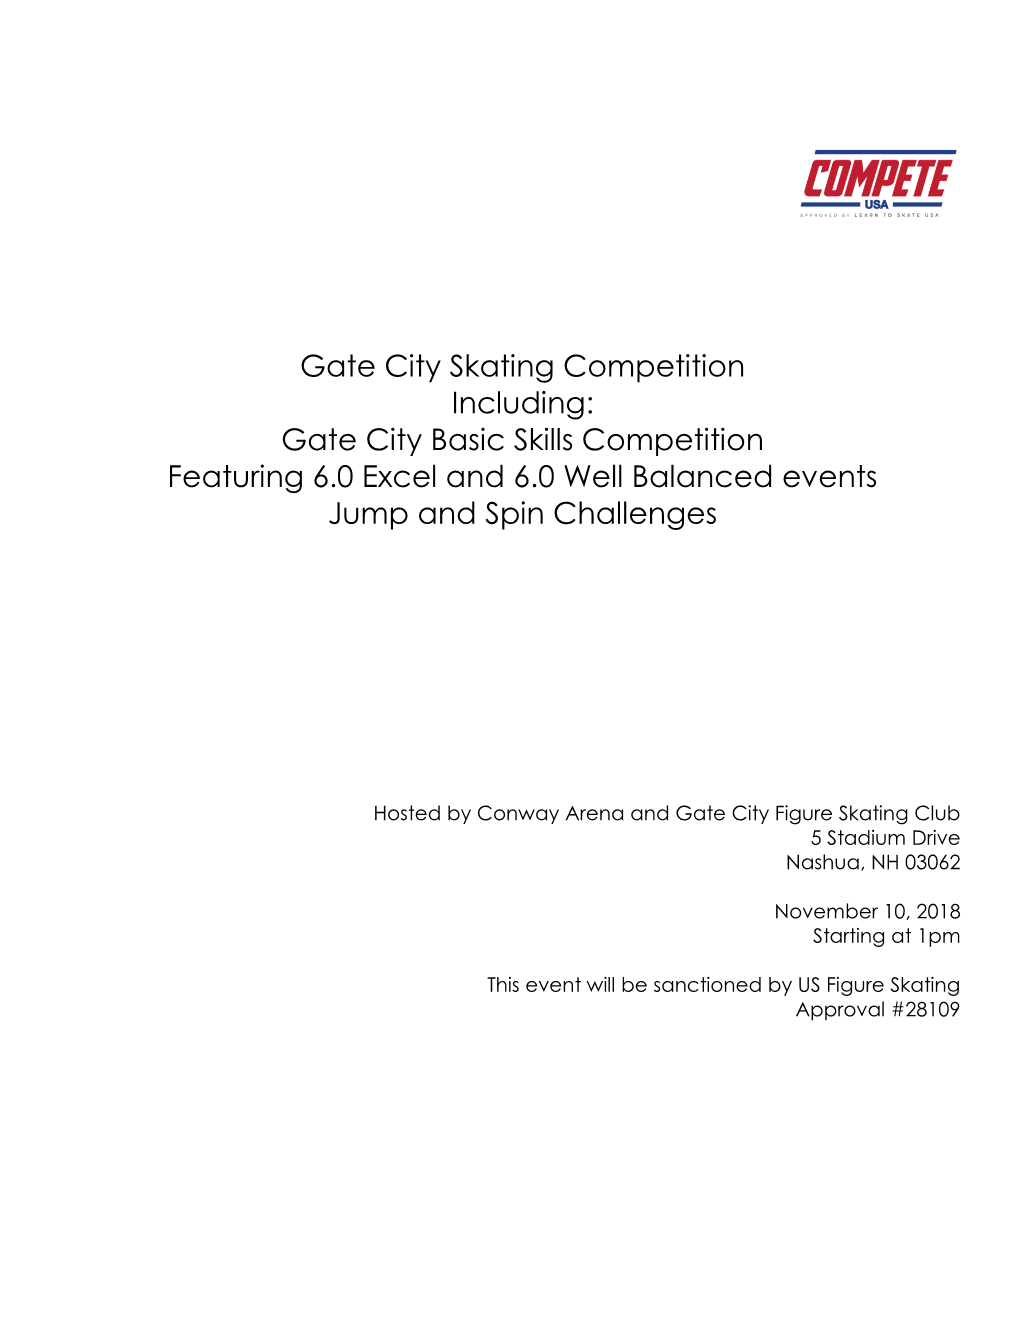 Gate City Skating Competition Including: Gate City Basic Skills Competition Featuring 6.0 Excel and 6.0 Well Balanced Events Jump and Spin Challenges